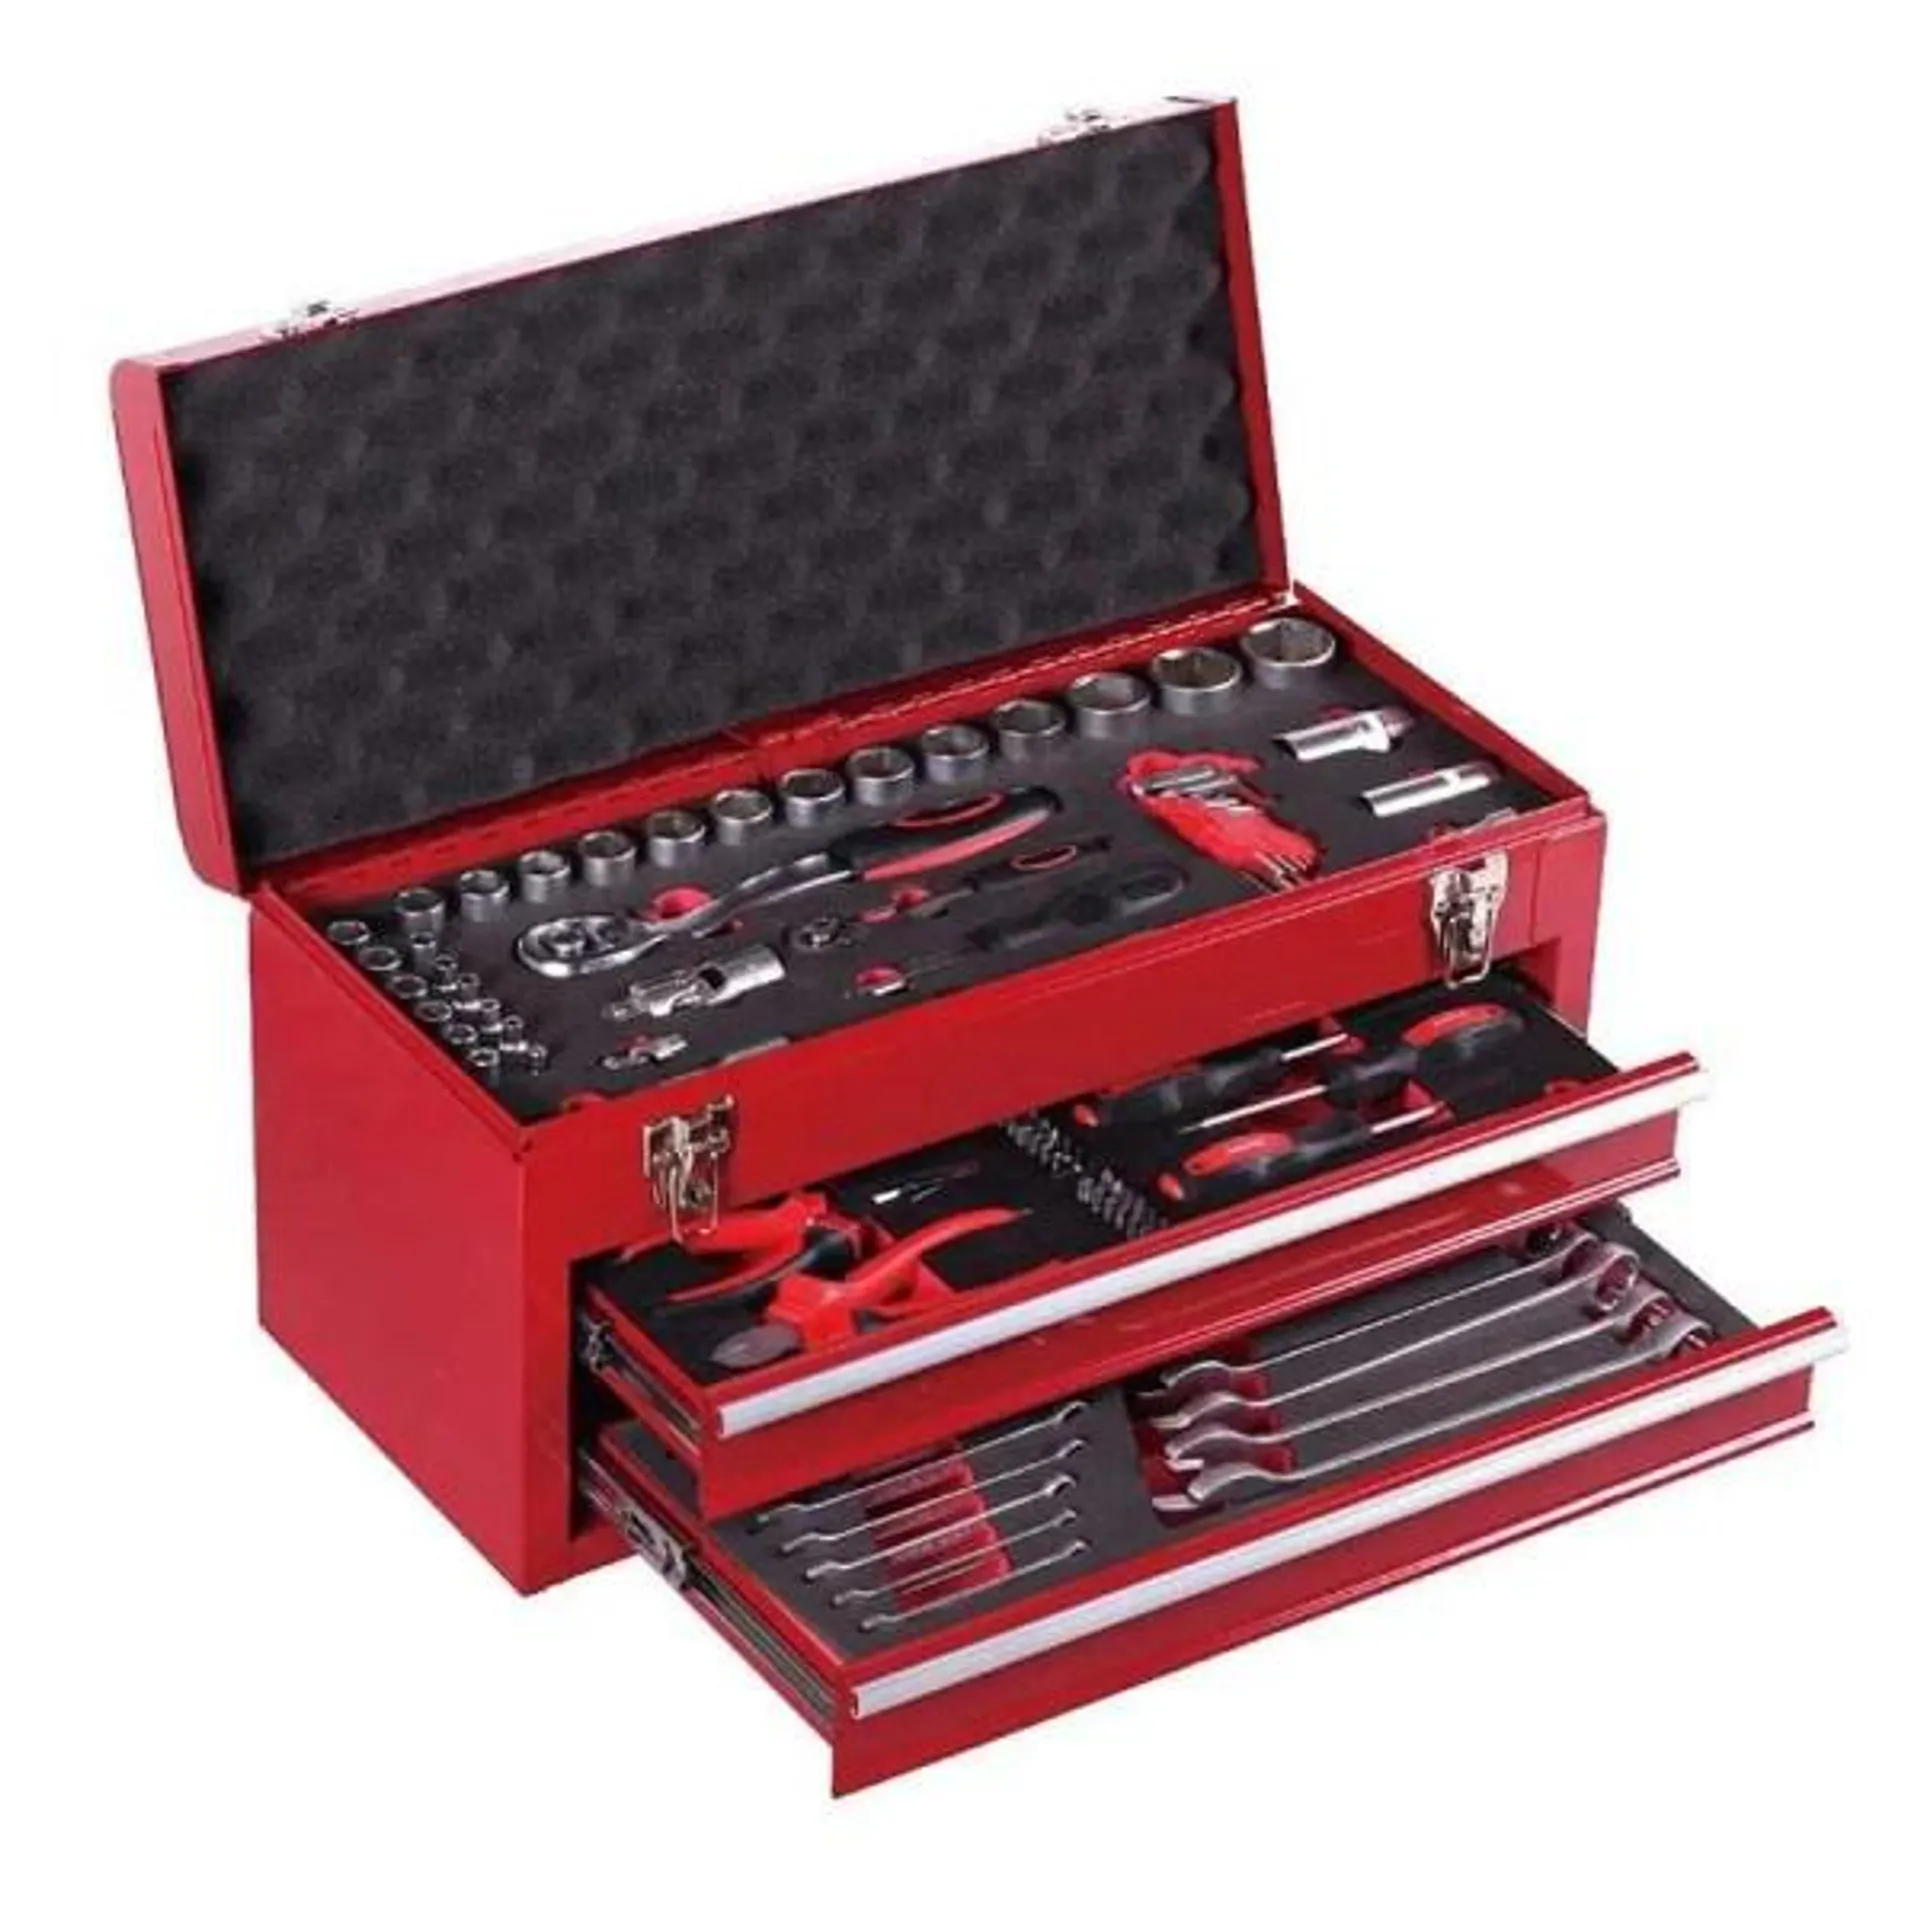 BigRed 92pc Professional Tool Box with Tools